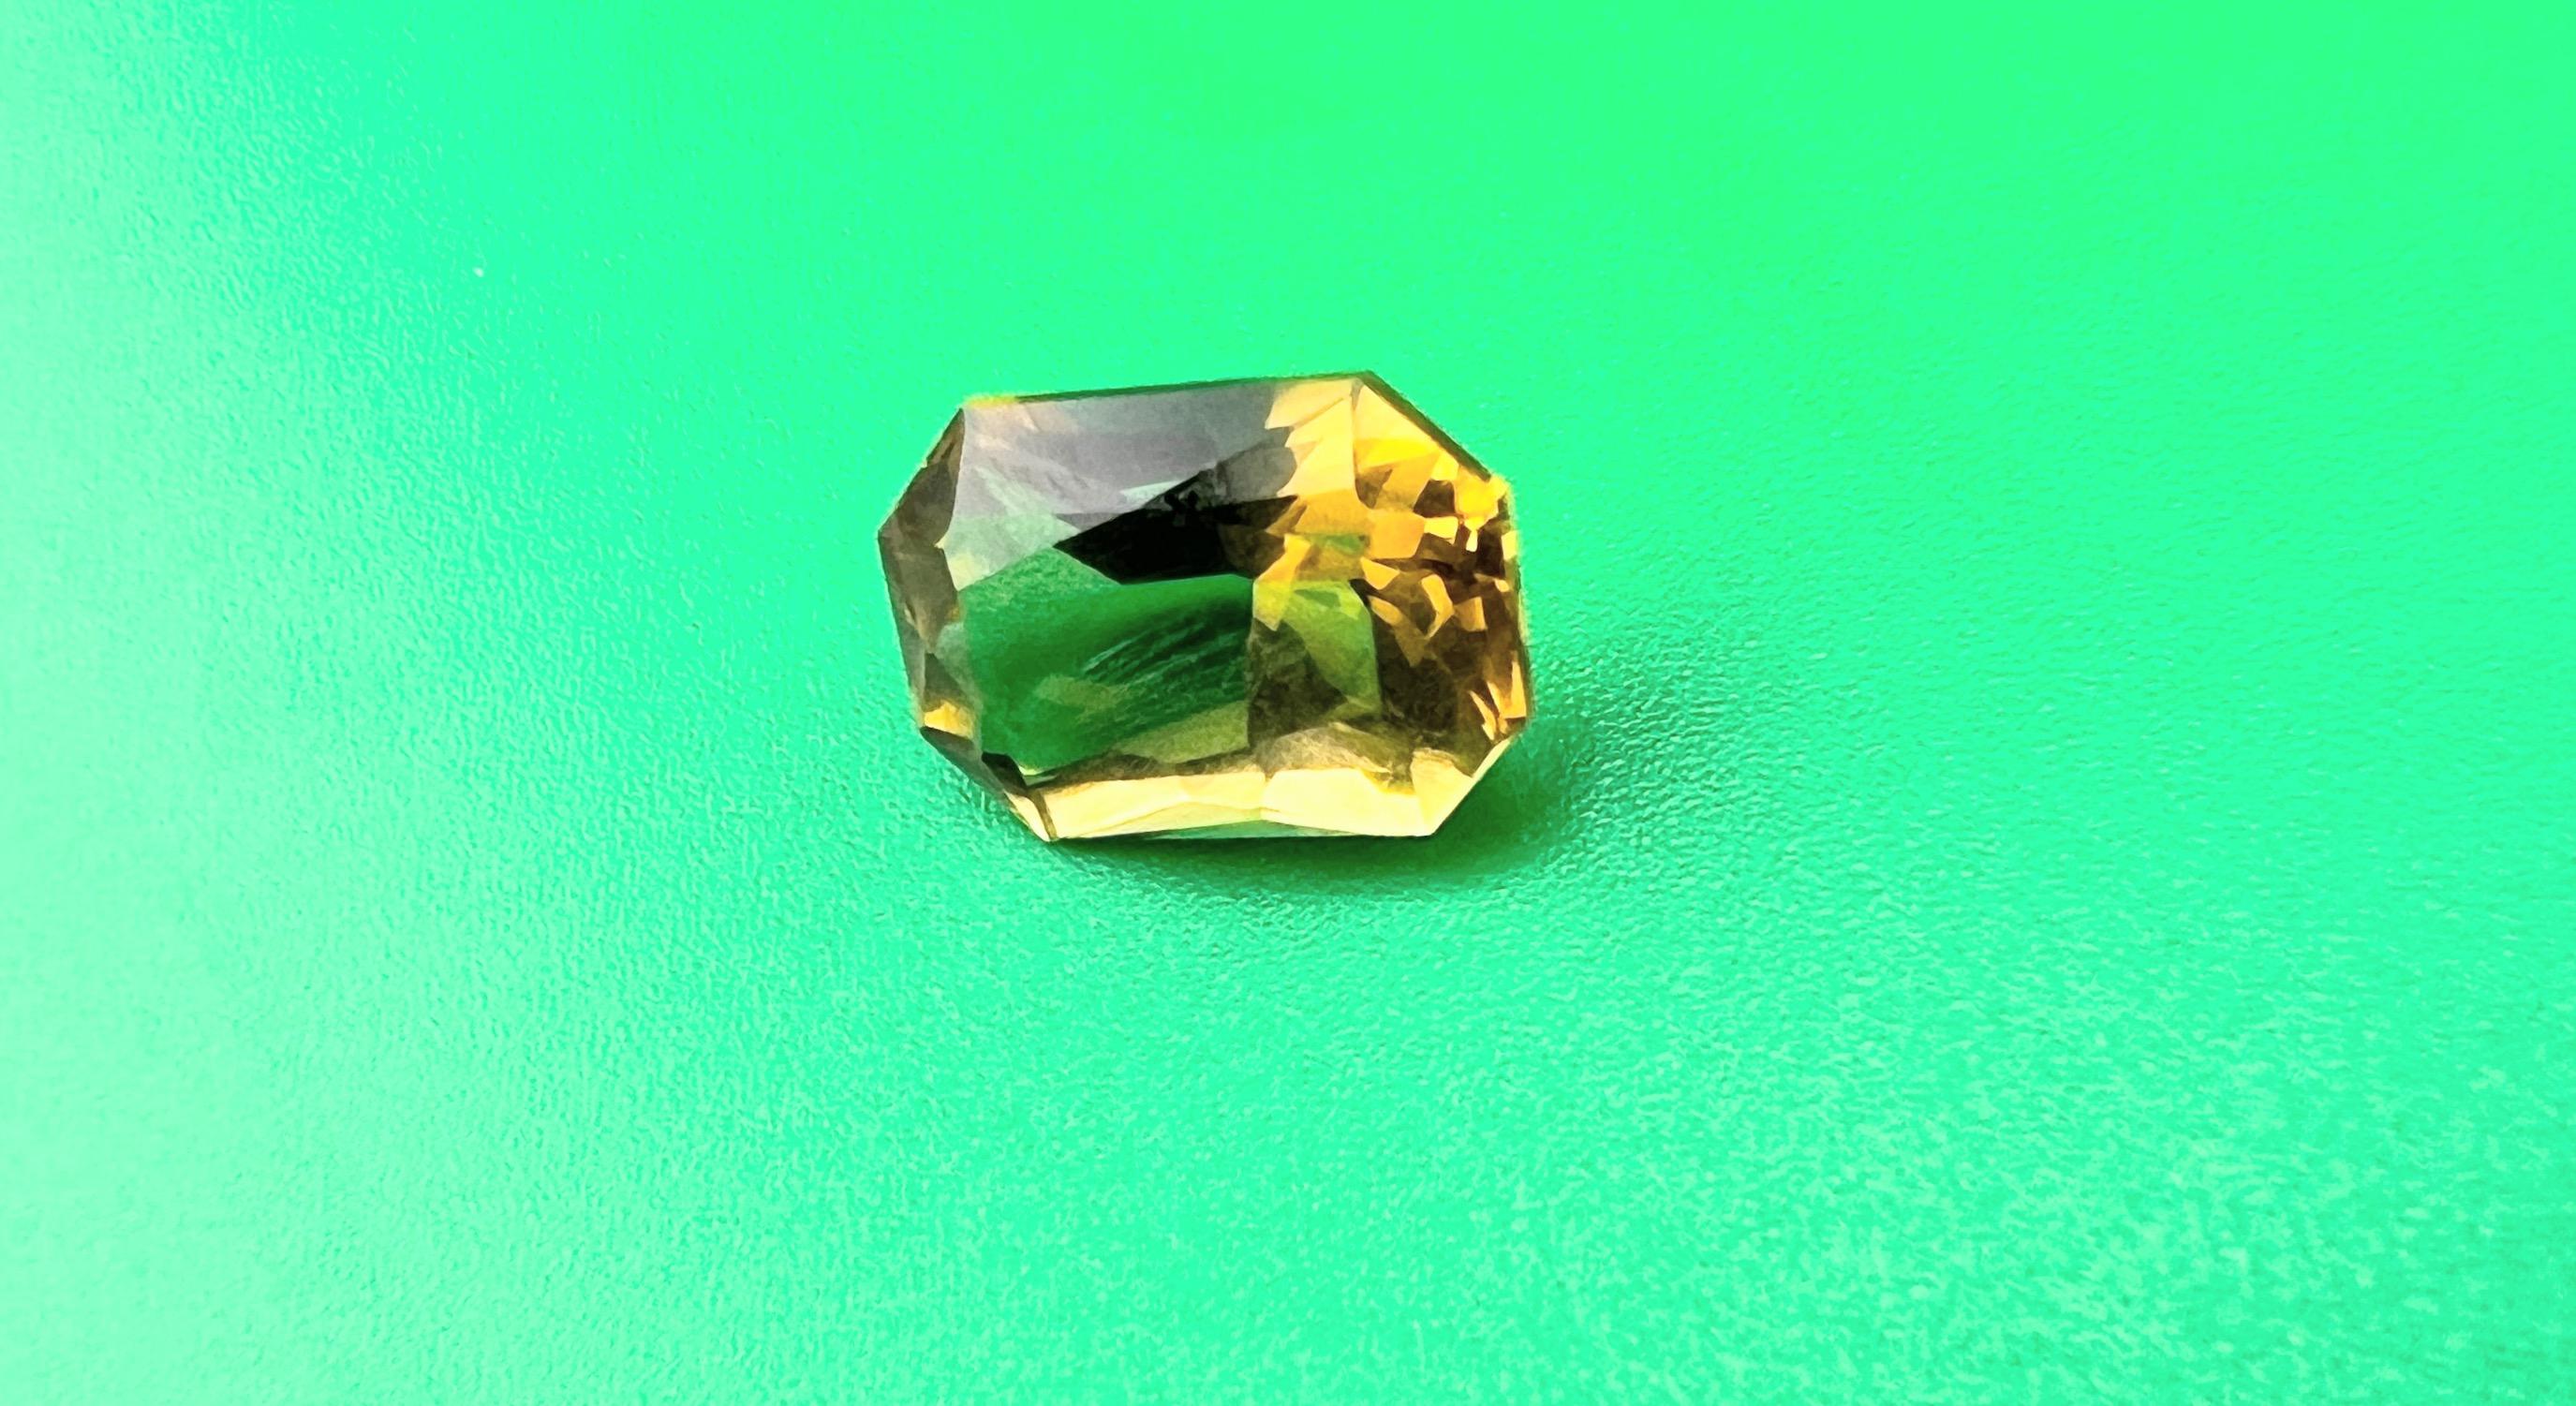 Introducing our exquisite 8.65ct Cushion Cut UNHEATED Natural Citrine, a gemstone that exudes warmth and radiance. This loose gemstone boasts impressive dimensions of 14.5 x 9.6mm with a depth of 8.8mm, making it a substantial and eye-catching piece